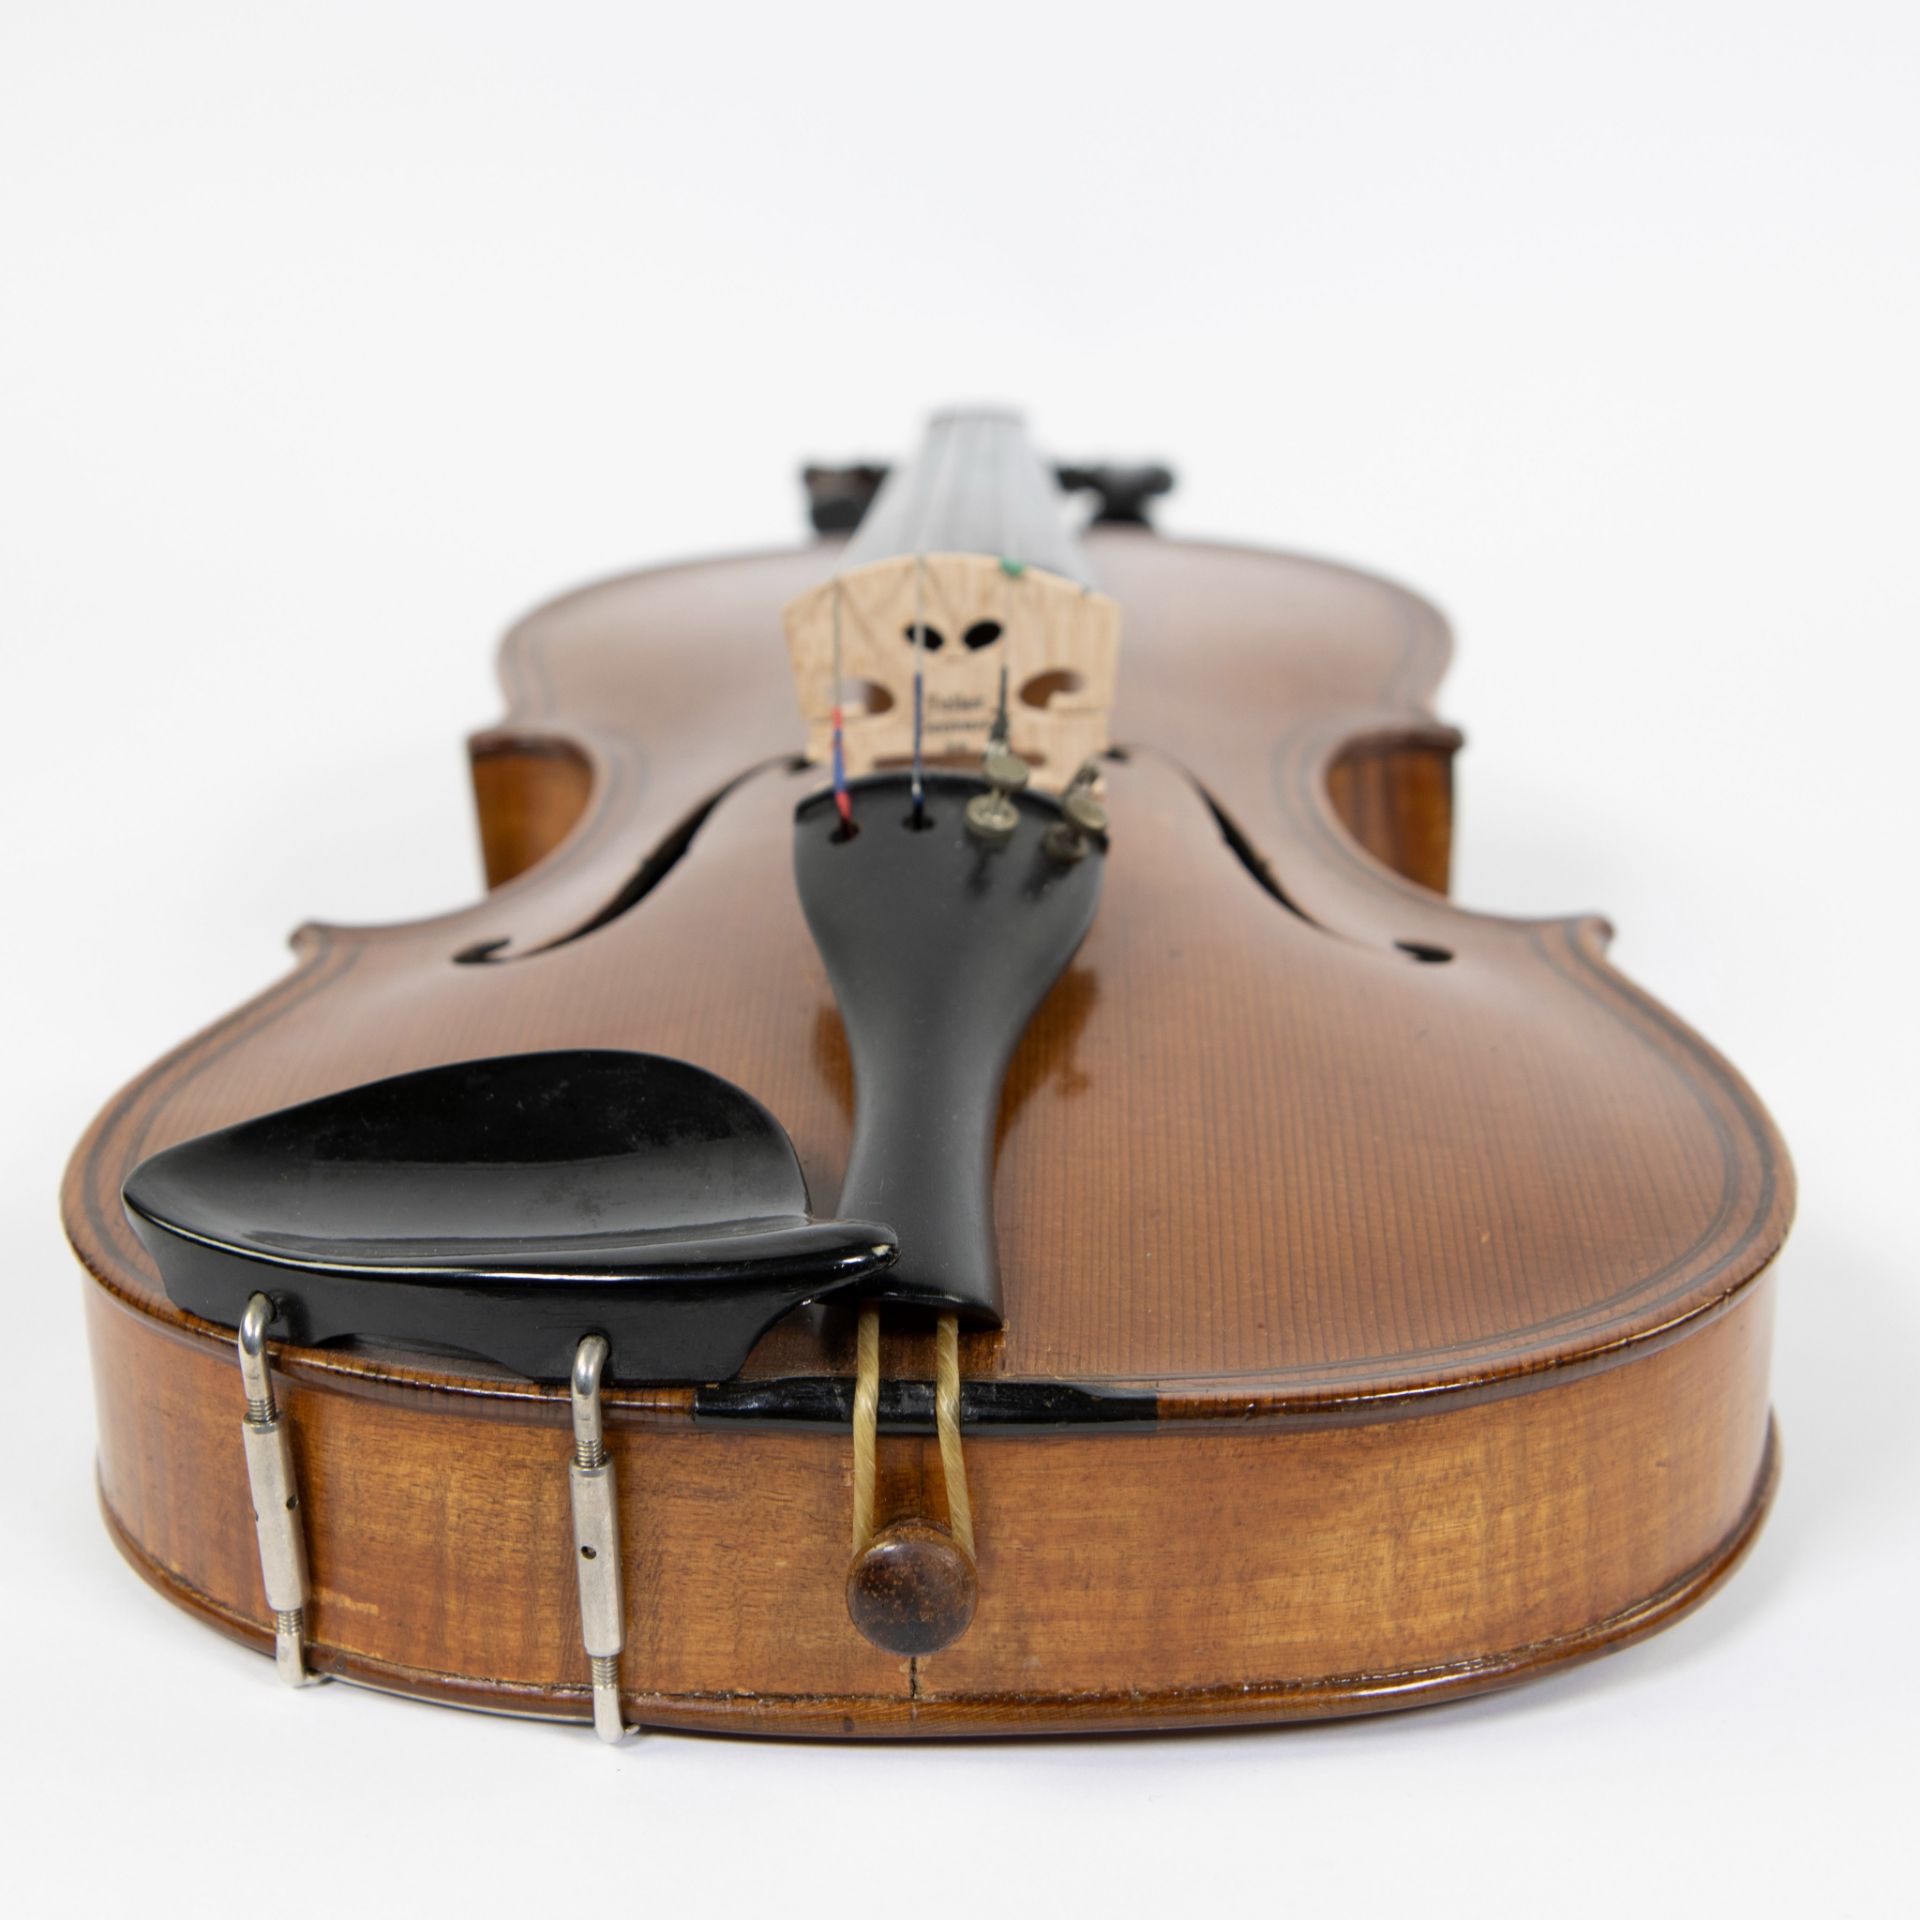 Violin label 'Giovan Paolo Maggini, Brefcie 1695, 364mm, double inlay, playable, wooden case - Image 5 of 5